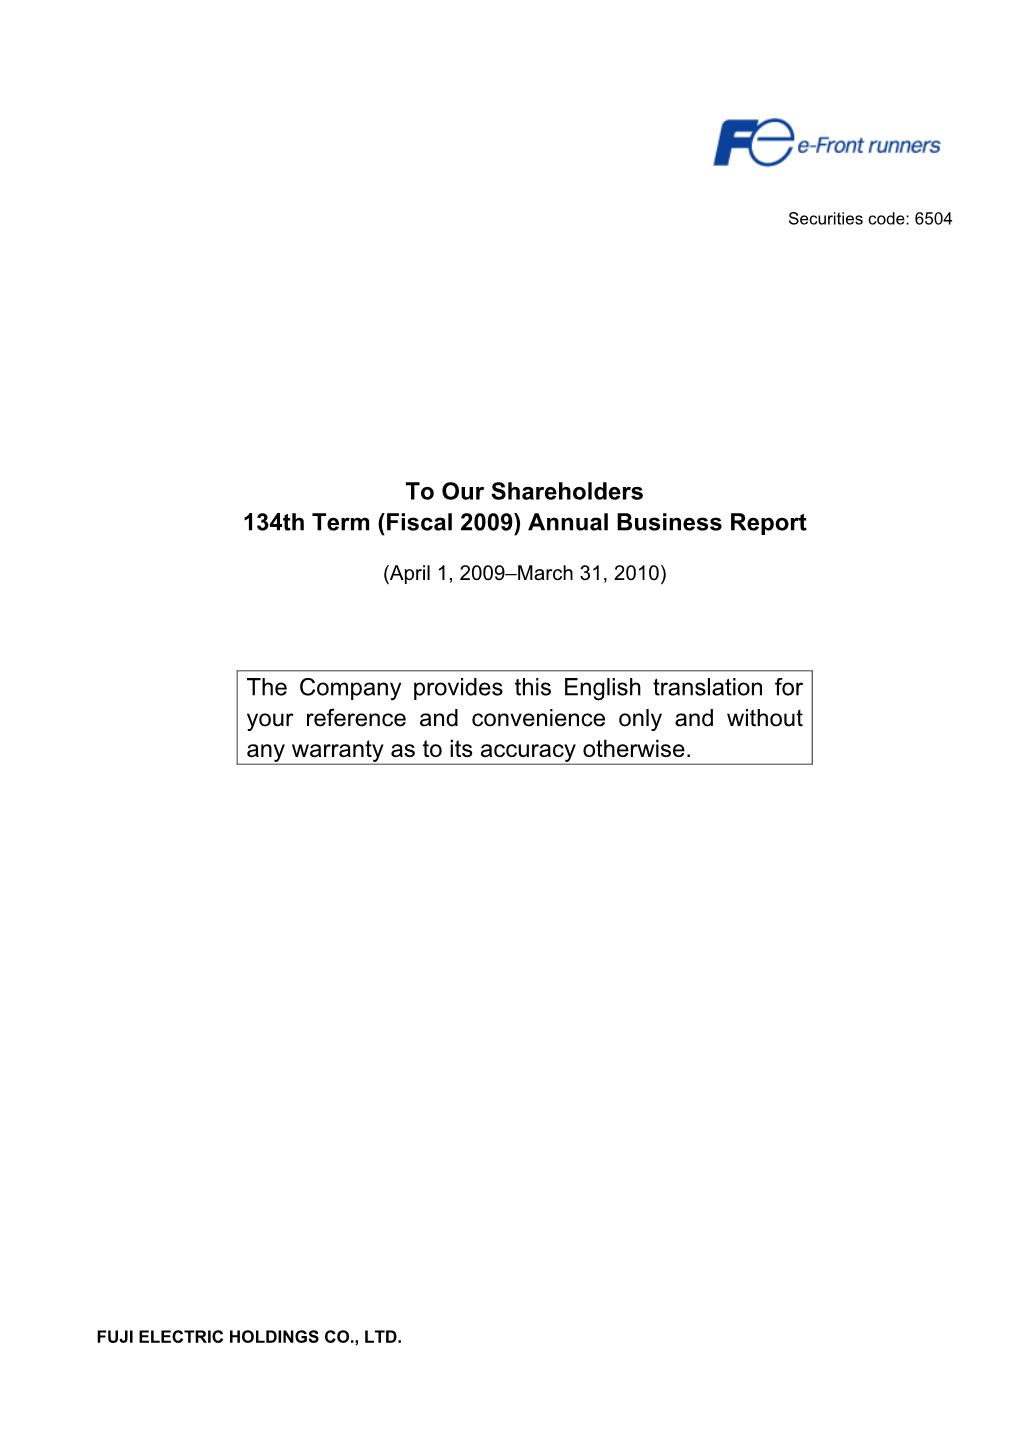 To Our Shareholders 134Th Term (Fiscal 2009) Annual Business Report